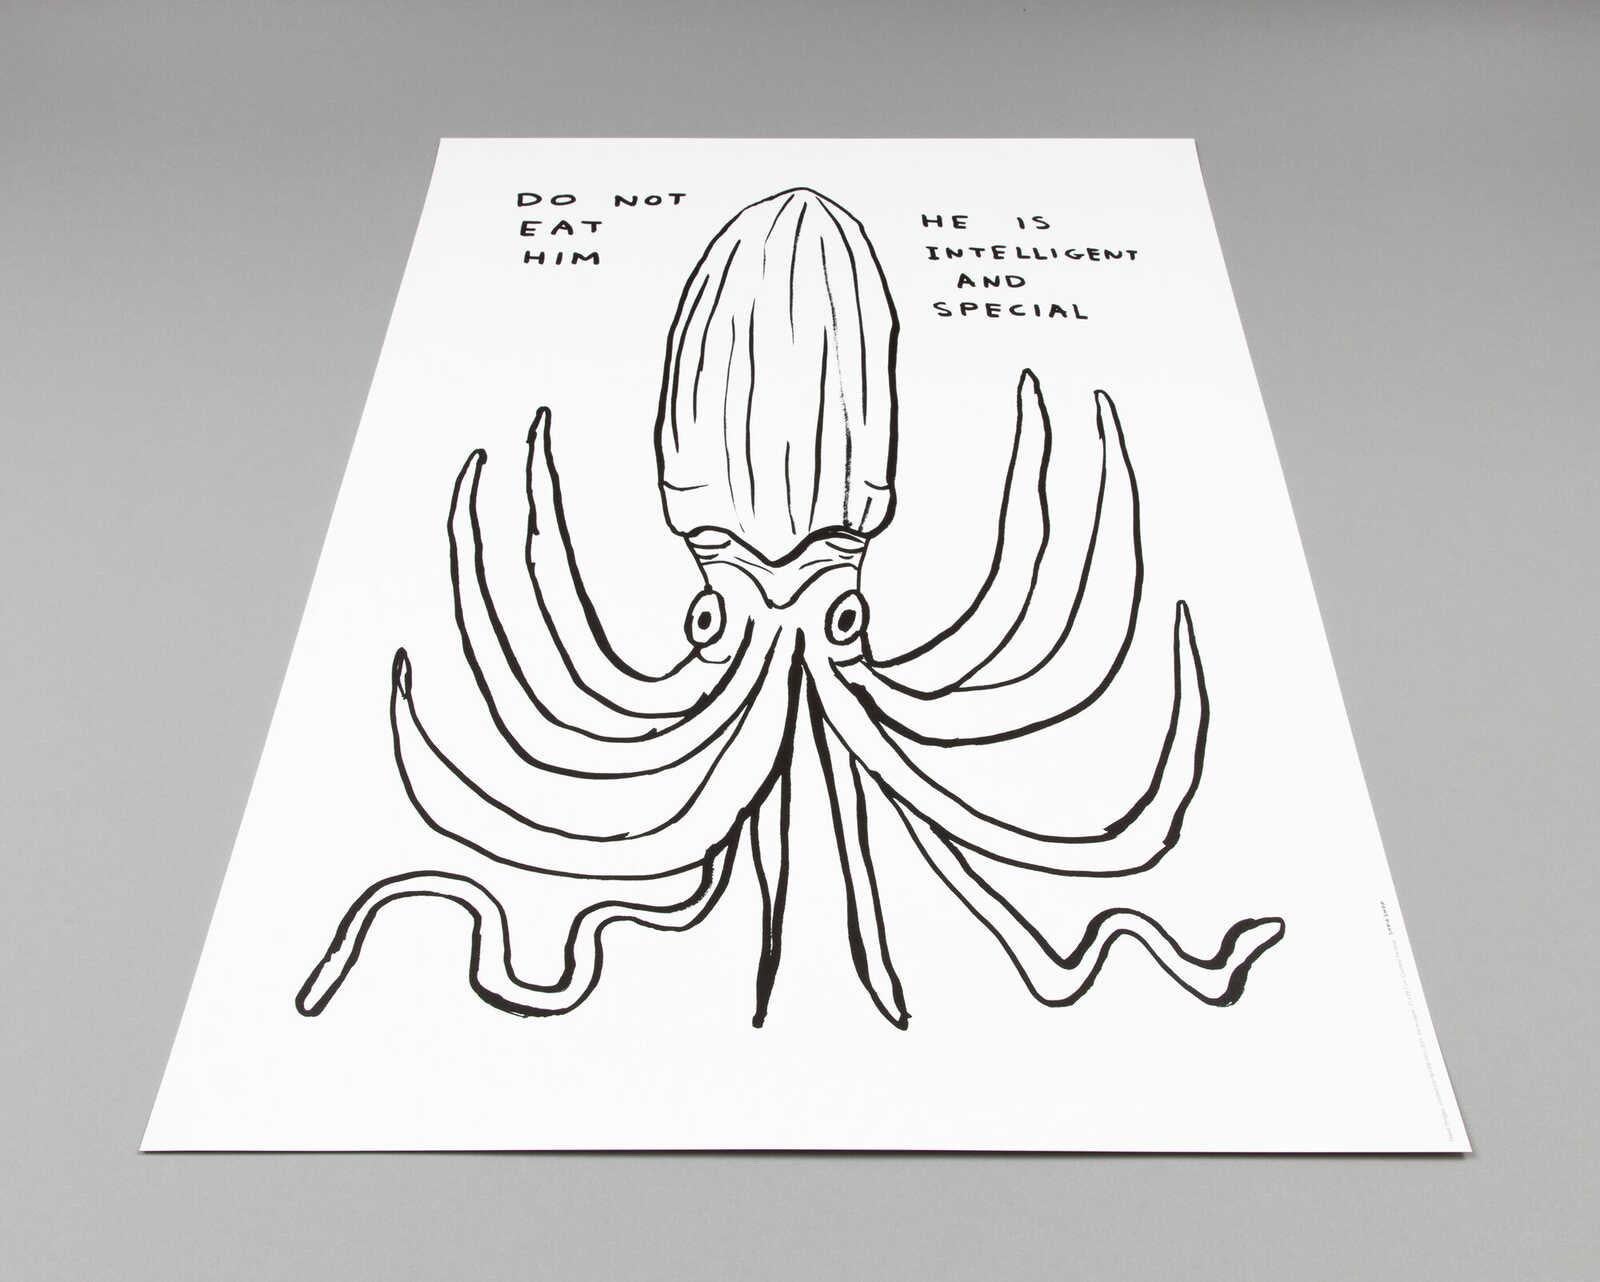 I've Heard About Freedom + Do Not Eat Him - Contemporary Print by David Shrigley